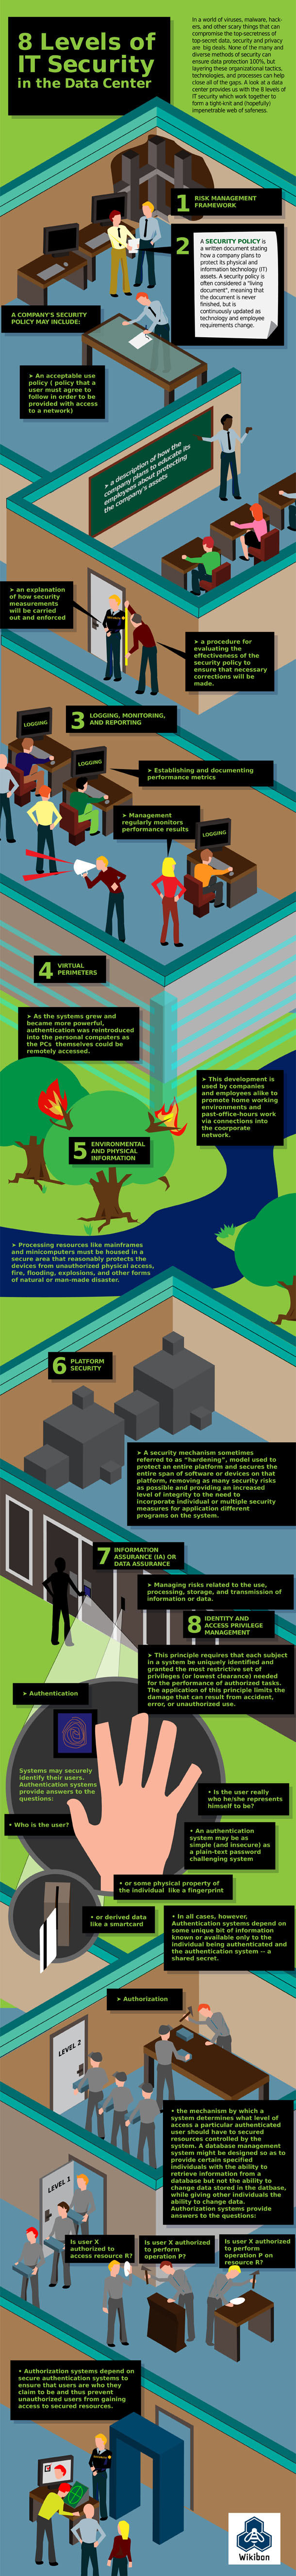 8 Levels of IT Security Infographic